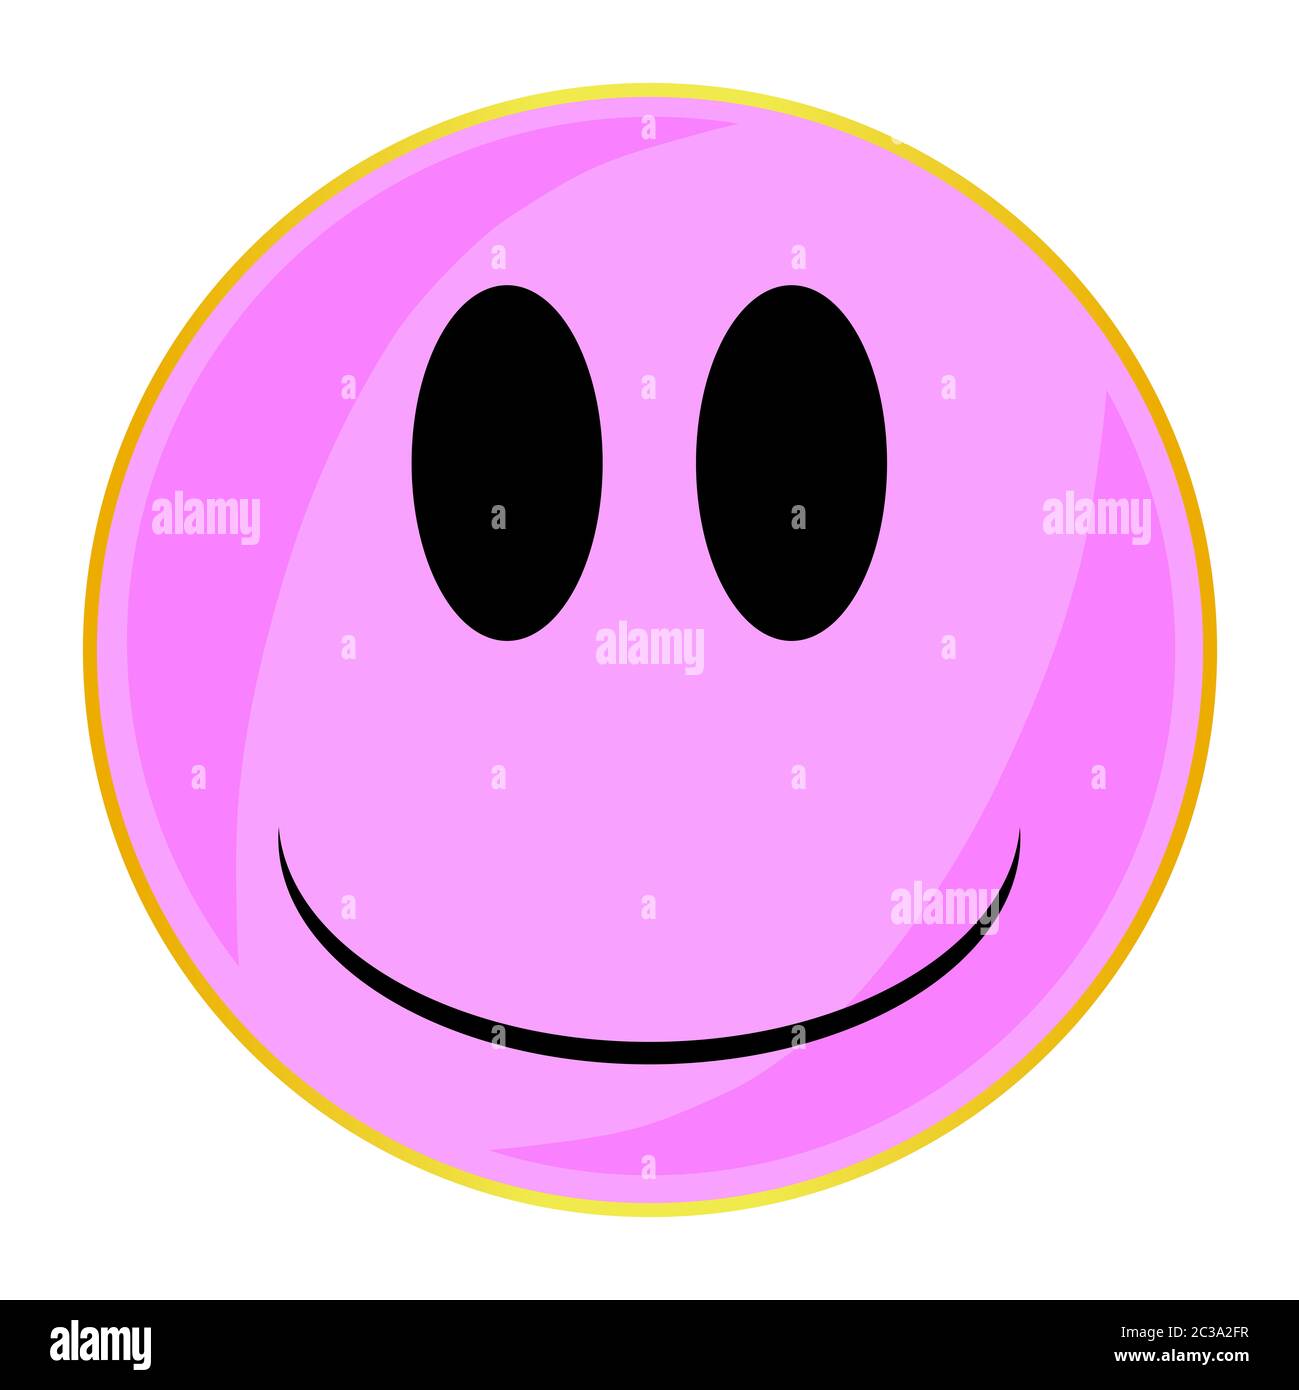 Smiley Face Lsd Poster Digital Urban Colorful Smile Acid Style Wallpapers  Acid Smile On Pink And Blue Geometric Background Stock Vector Image  Art   Alamy